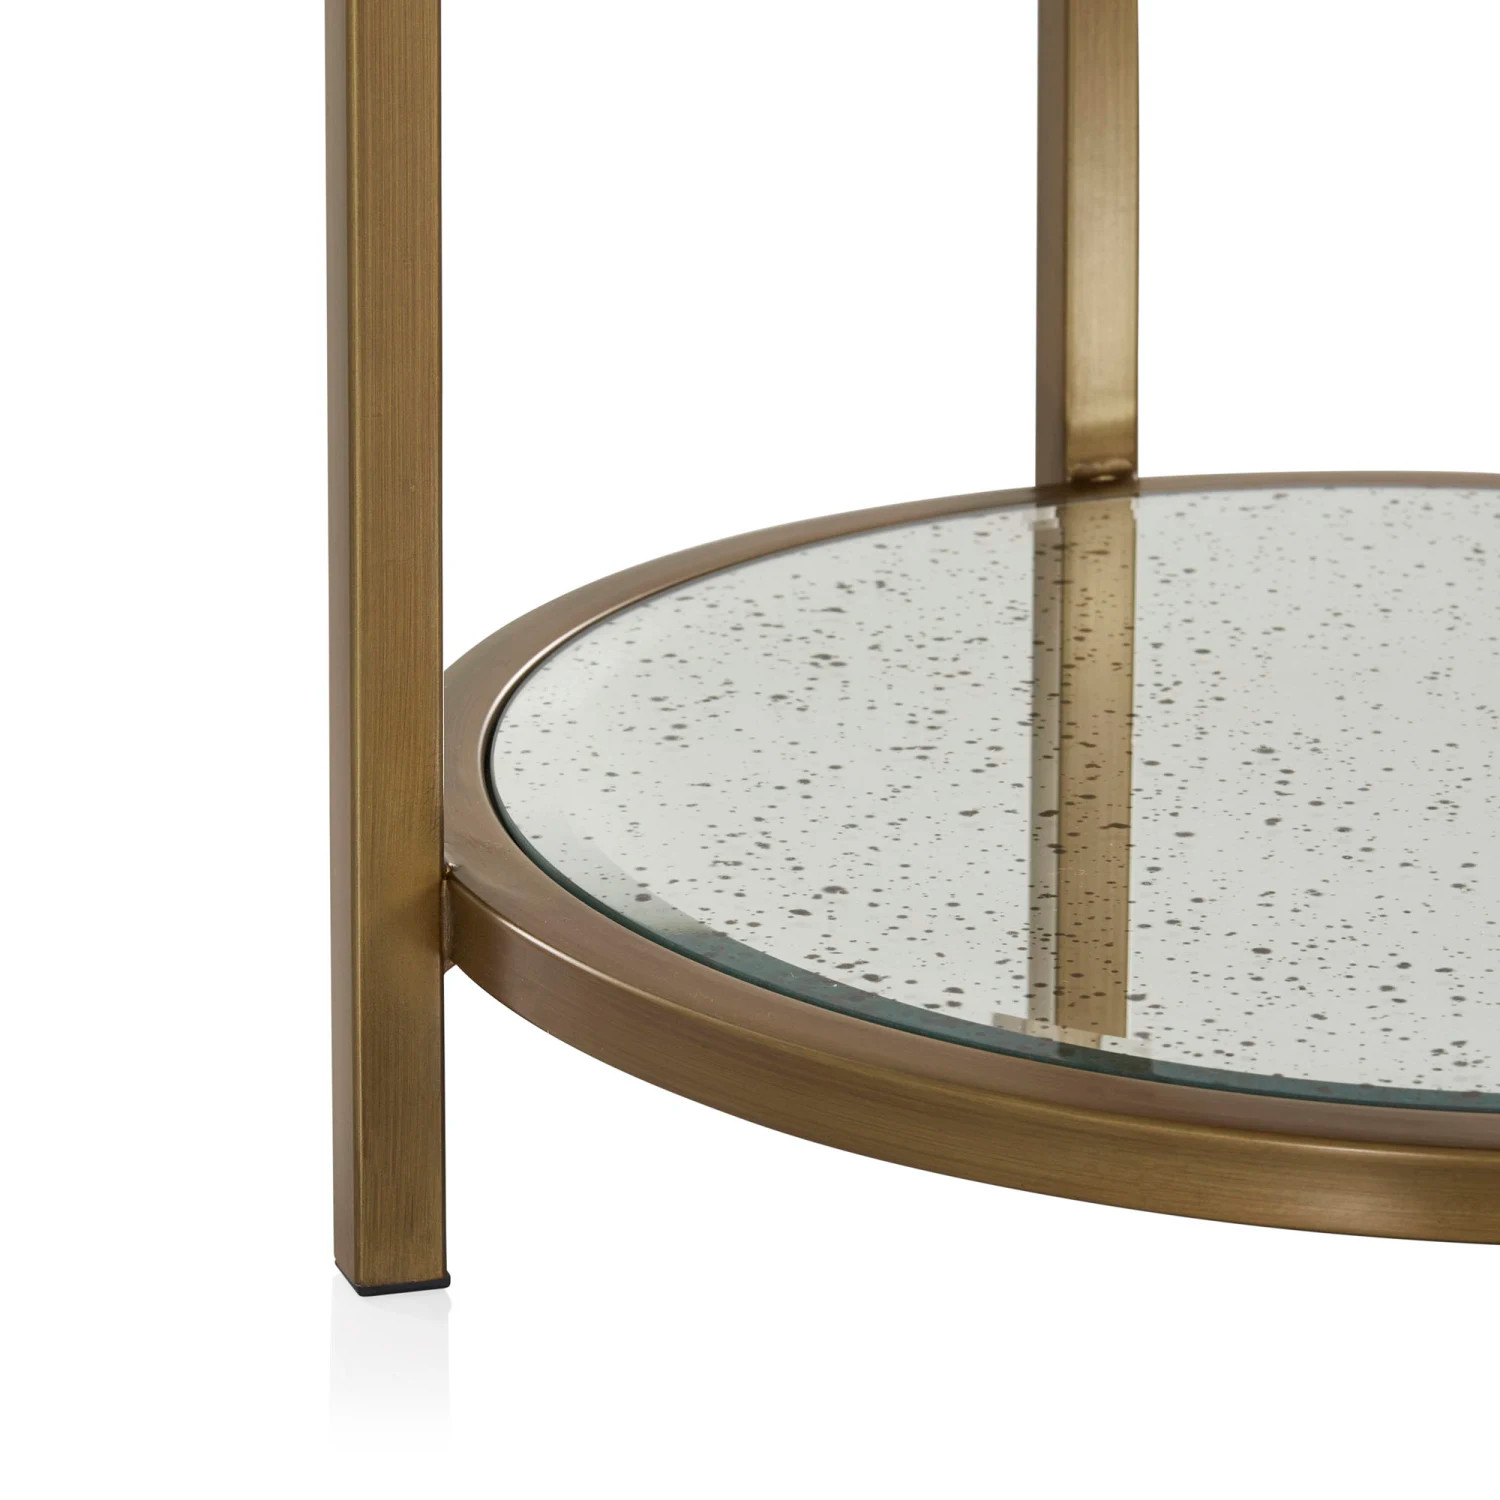 Arden Side Table